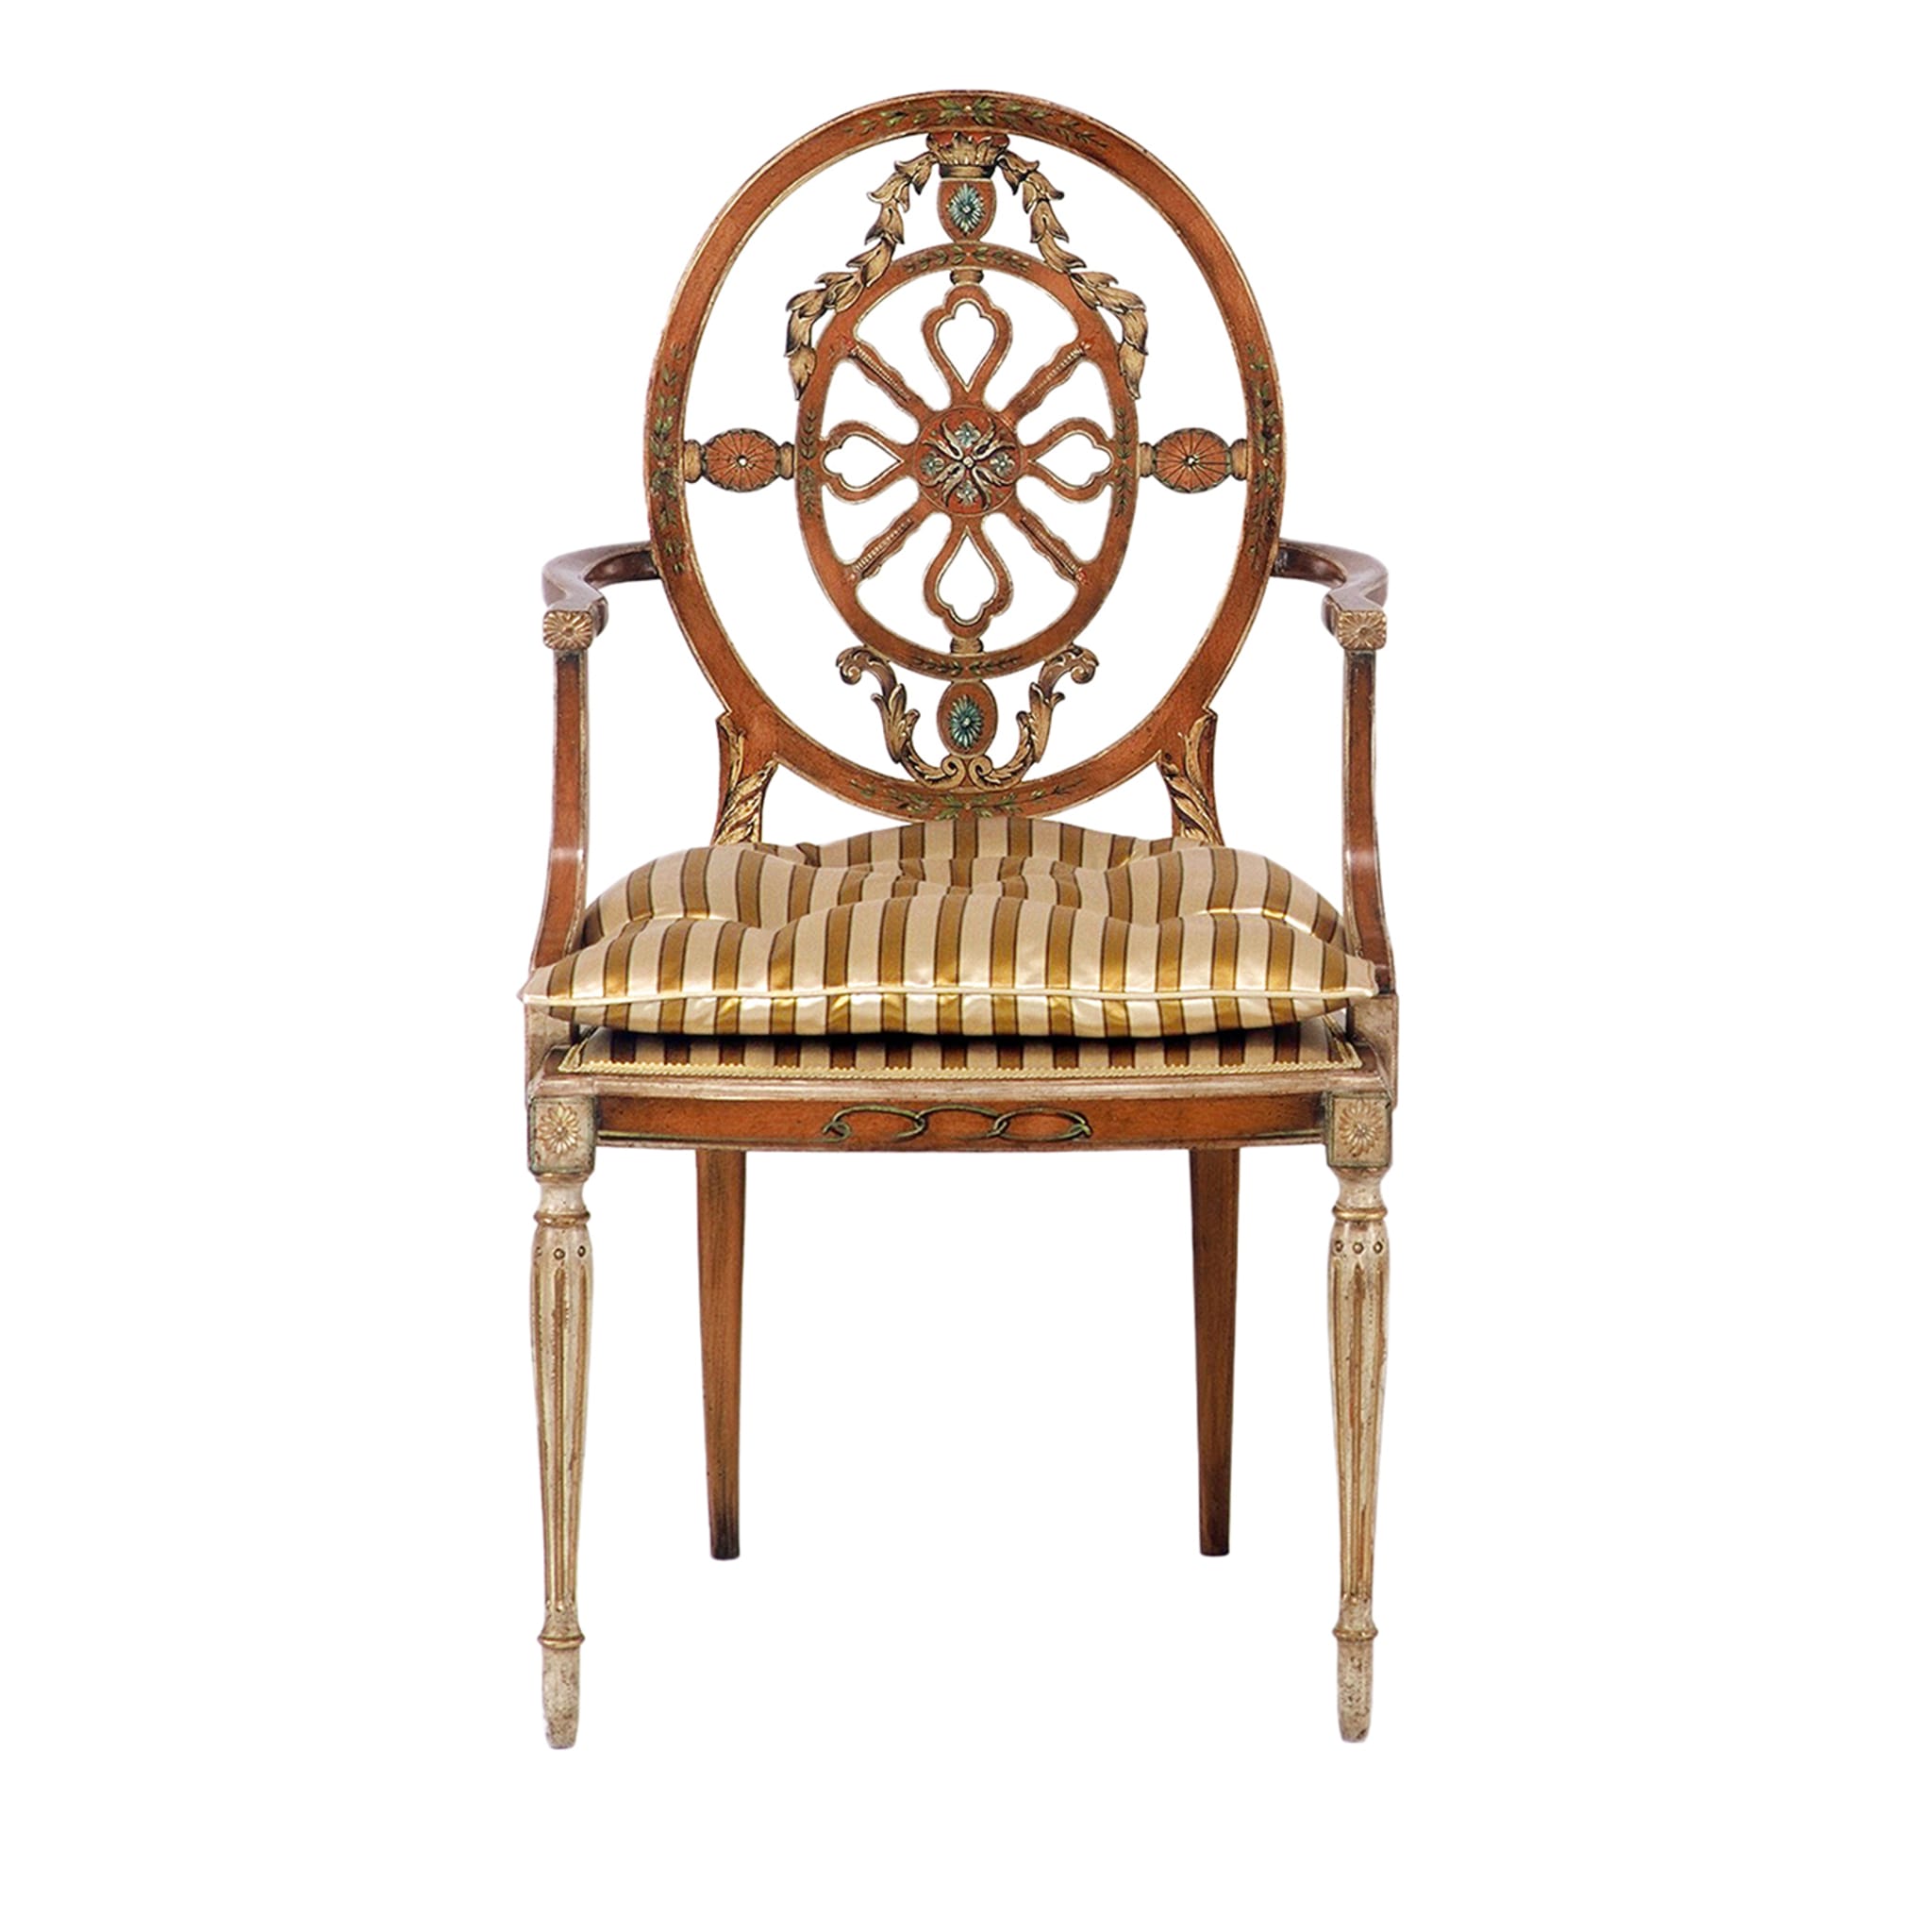 Hepplewhite-Style Polychrome Chair With Arms - Main view